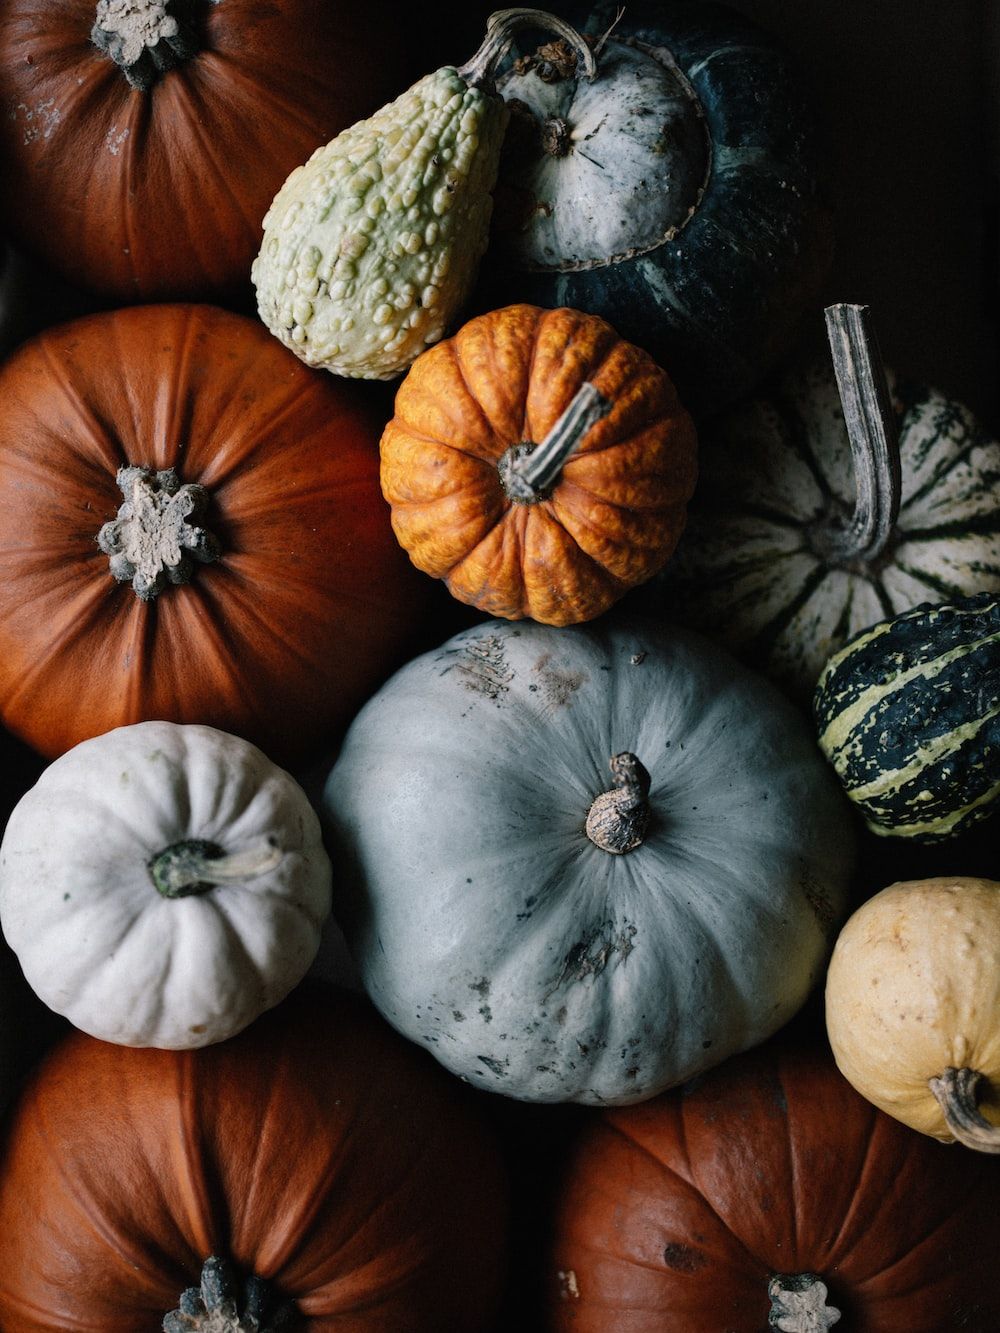 Pumpkins Picture. Download Free Image